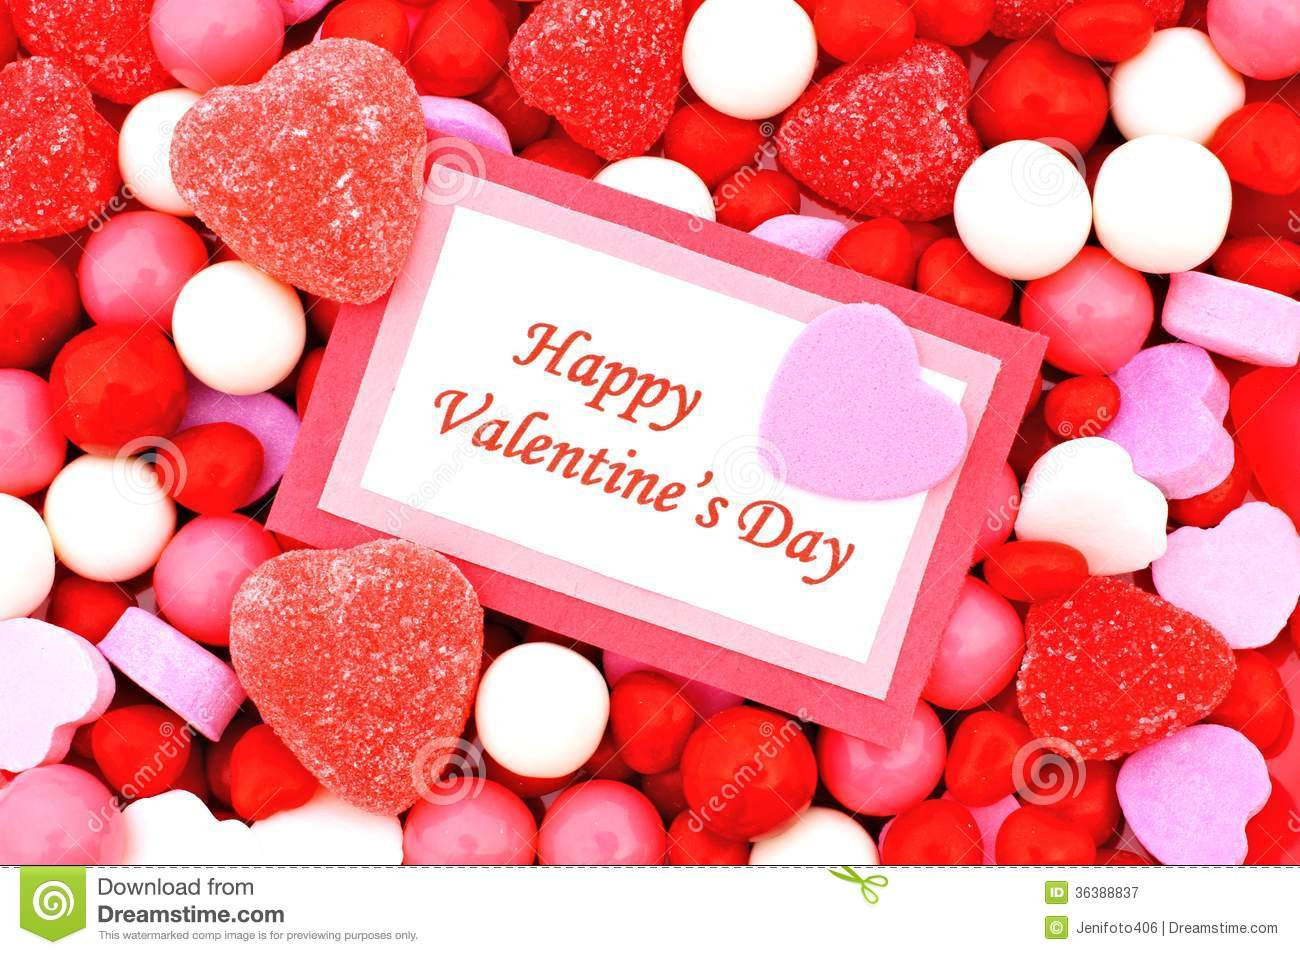 Valentines Day Card With Candy
 Happy Valentines Day stock image Image of heart message